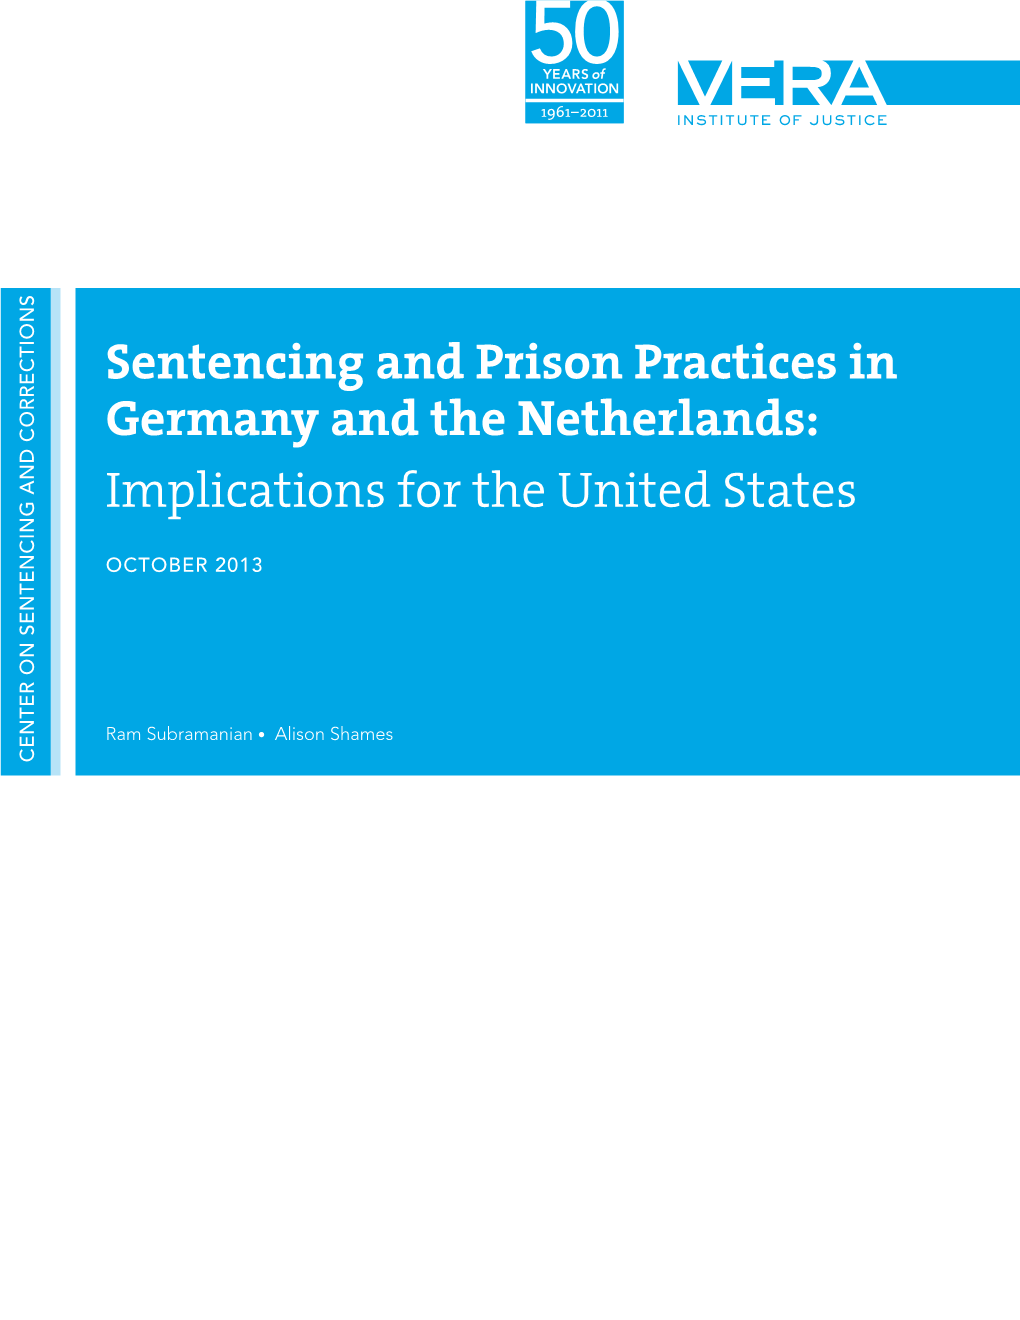 SENTENCING and PRISON PRACTICES in GERMANY and the NETHERLANDS Introduction